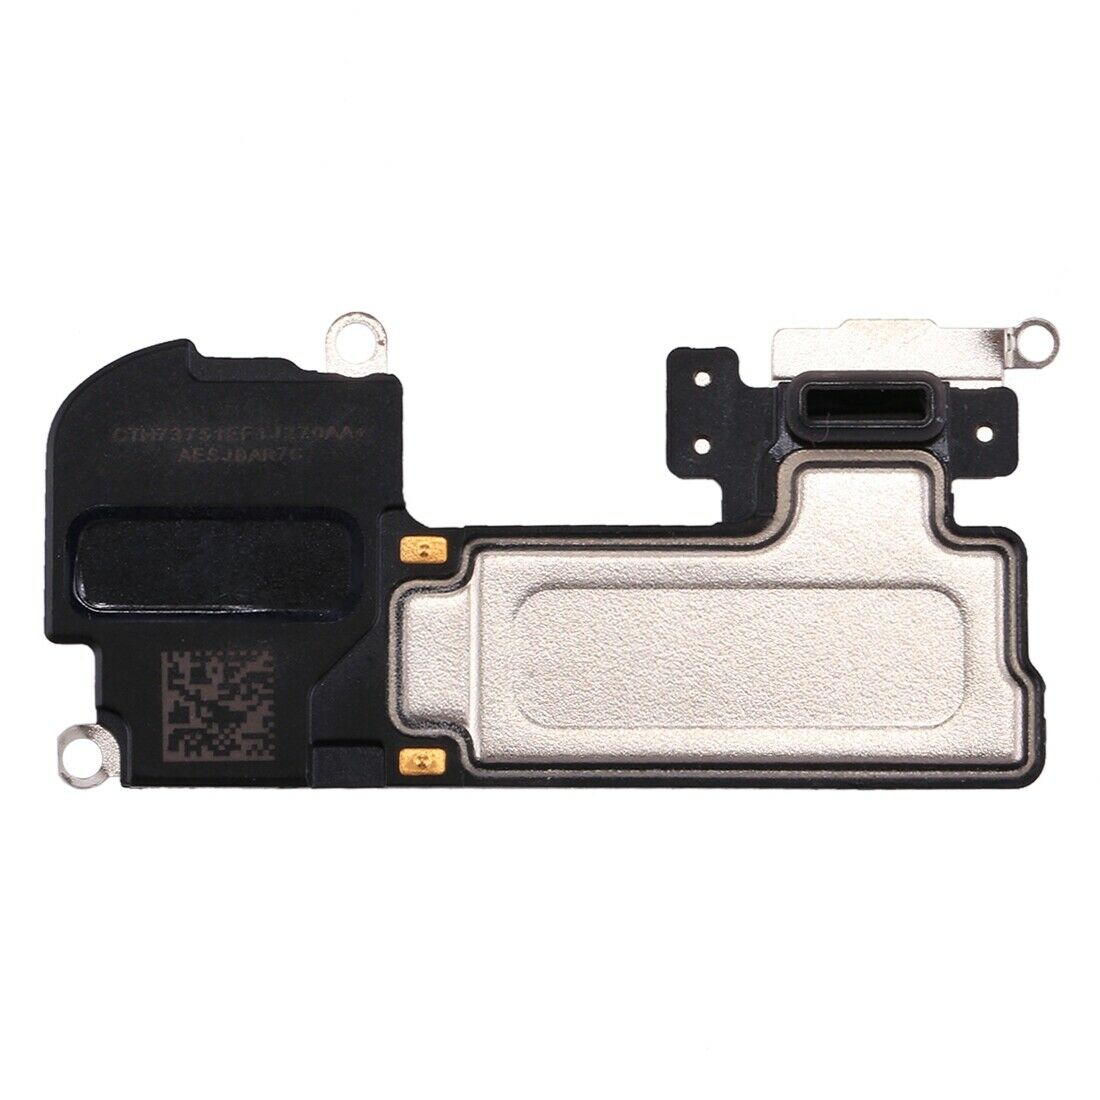 Apple iPhone X Genuine Earpiece Speaker Internal Replacement Unit for [product_price] - First Help Tech